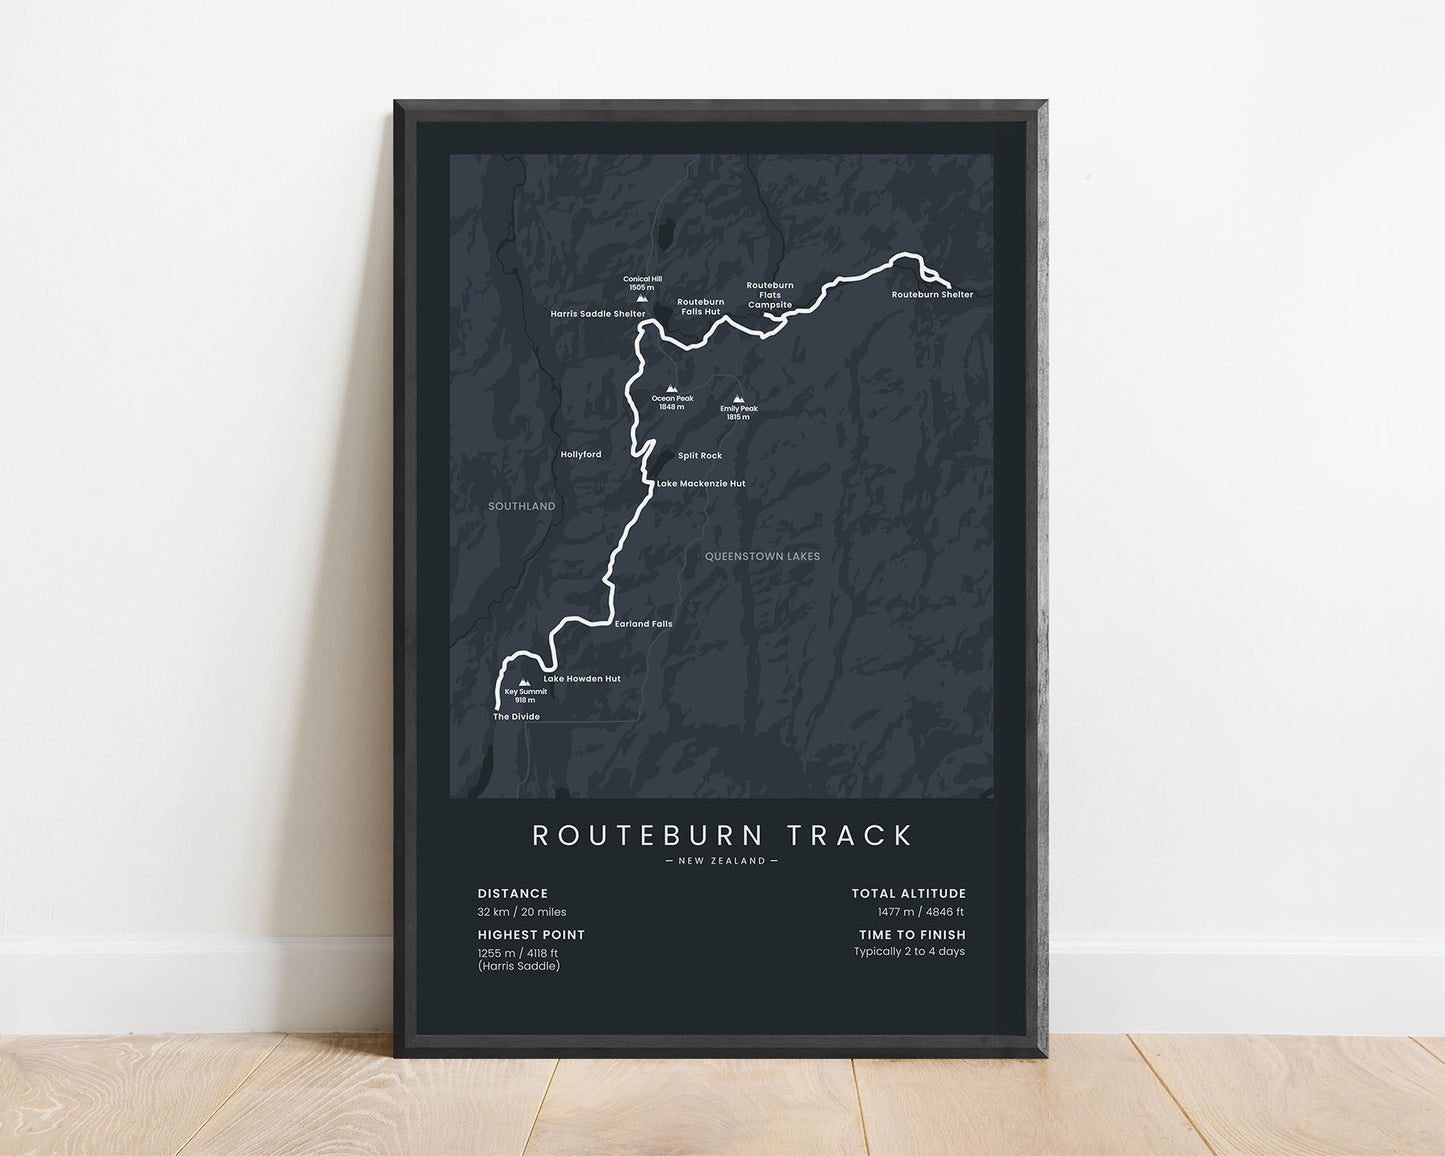 Routeburn Track (New Zealand) Trail Poster with Black Background